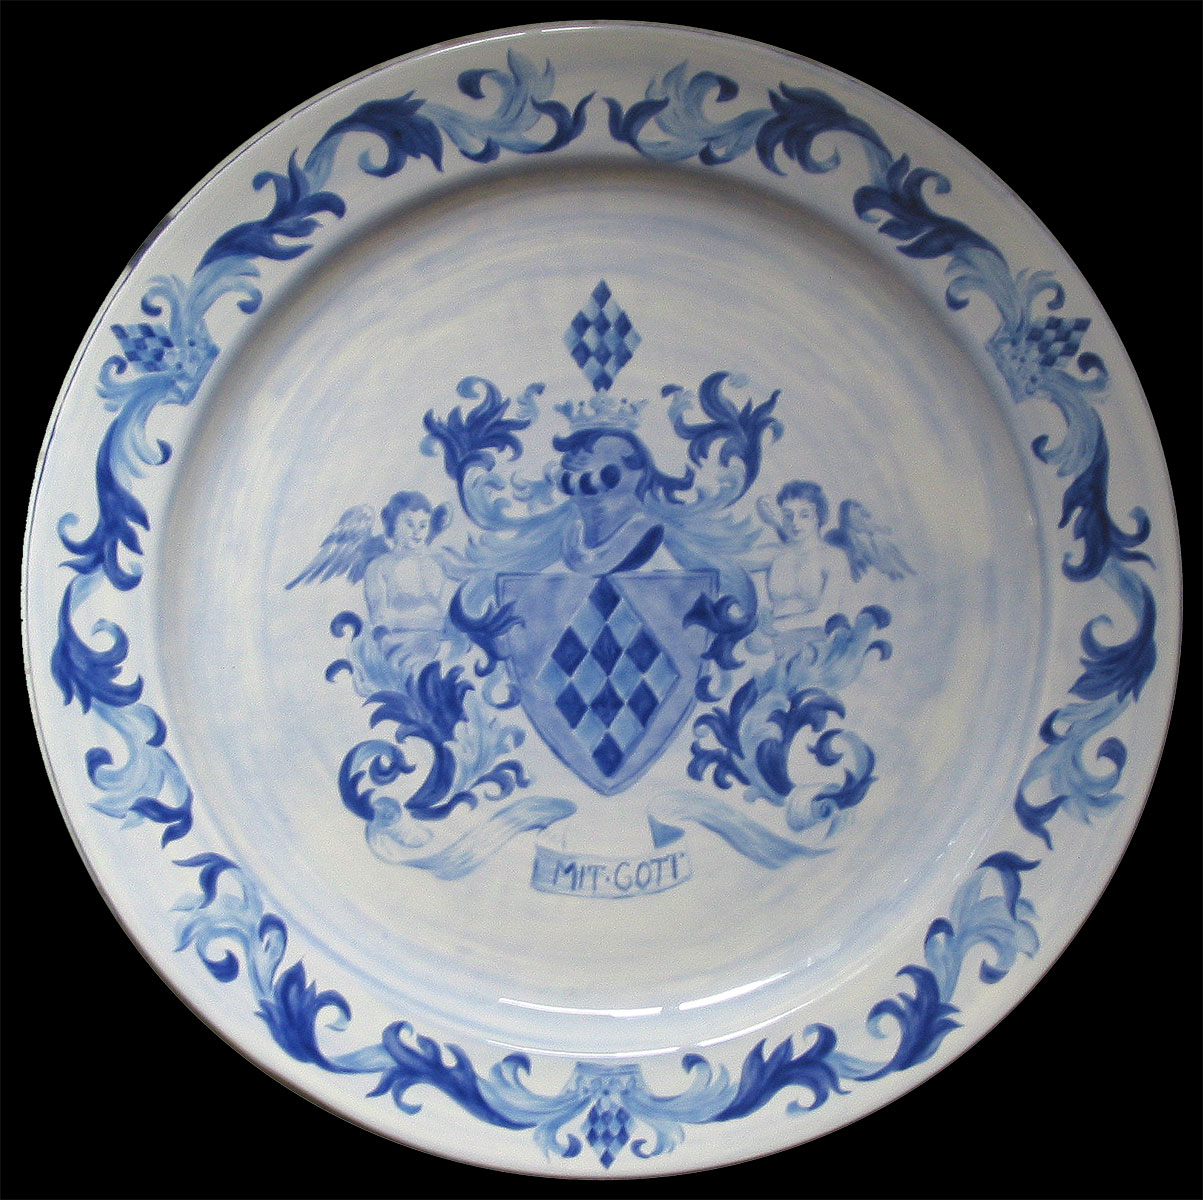 Plate with Crest